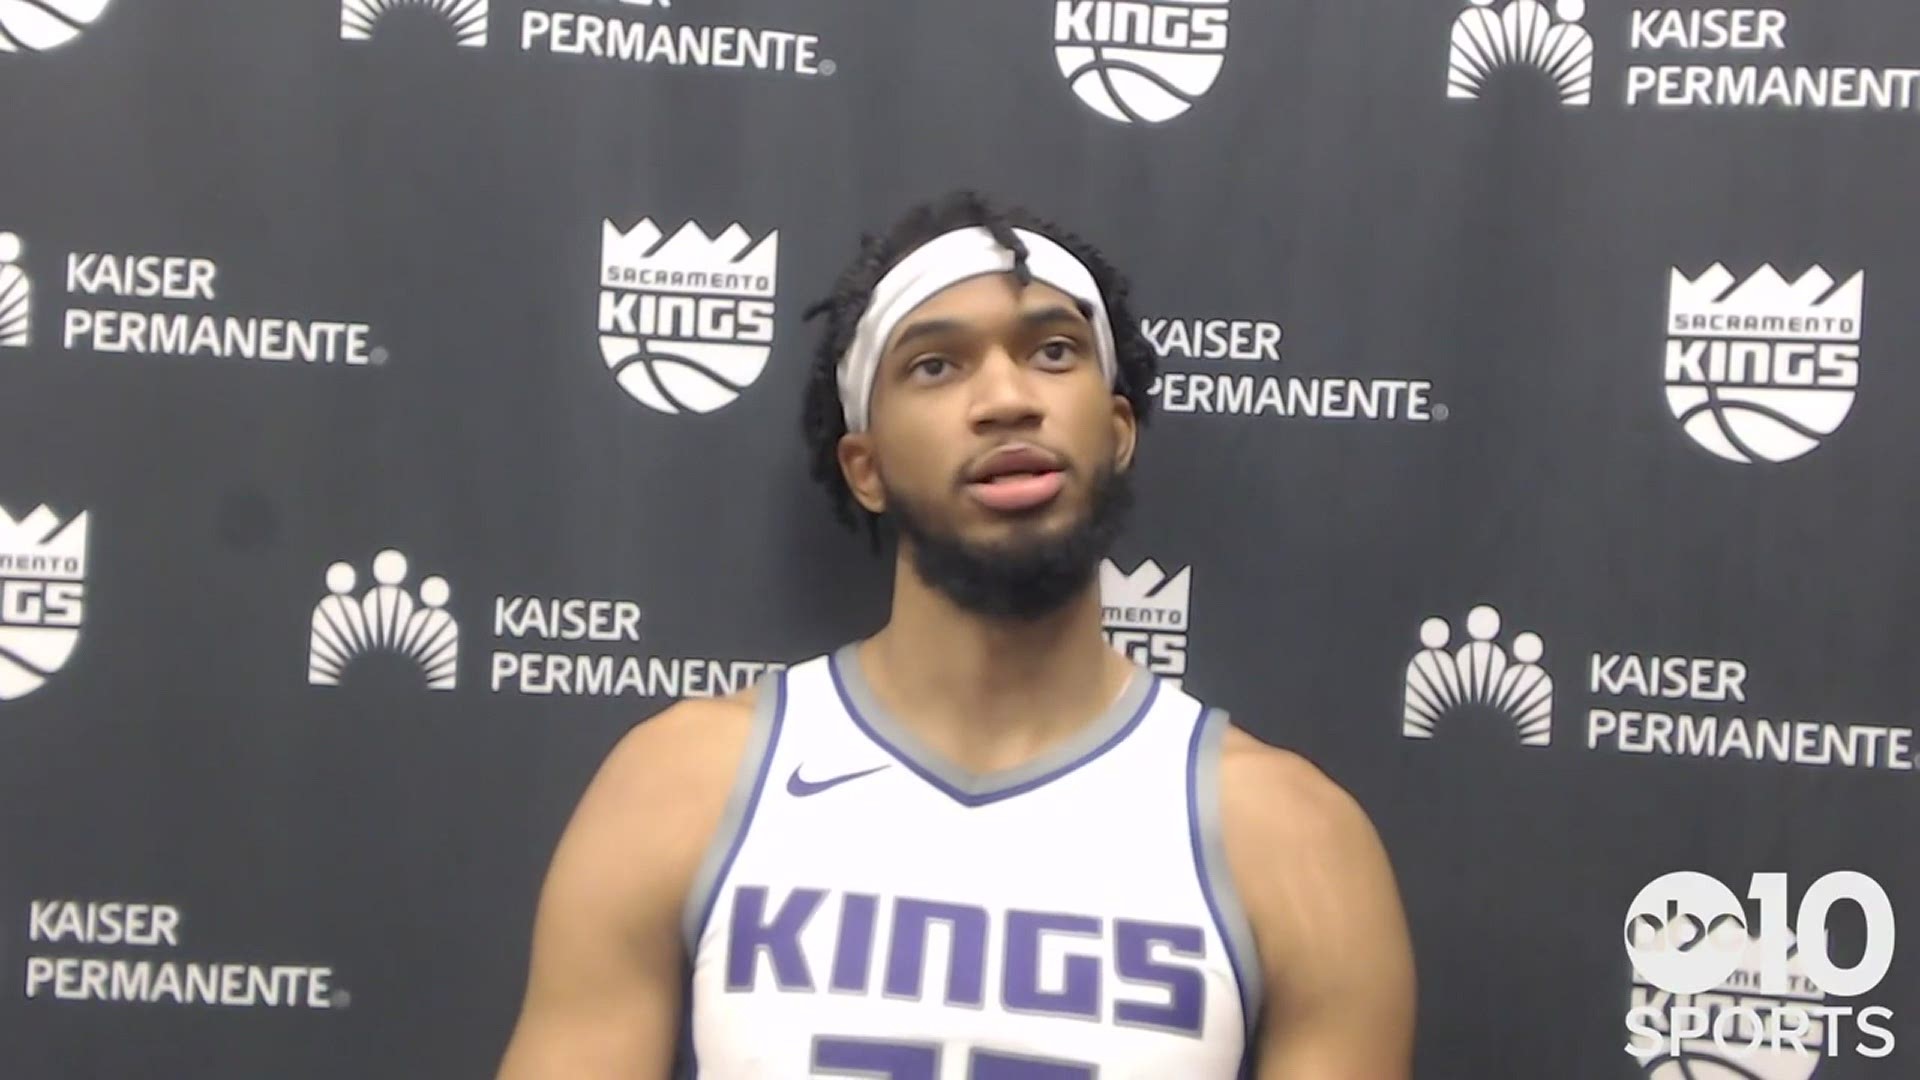 Marvin Bagley III talks about his second straight solid outing for Sacramento, helping lead the Kings to a 111-99 victory over the Mavericks in Dallas.